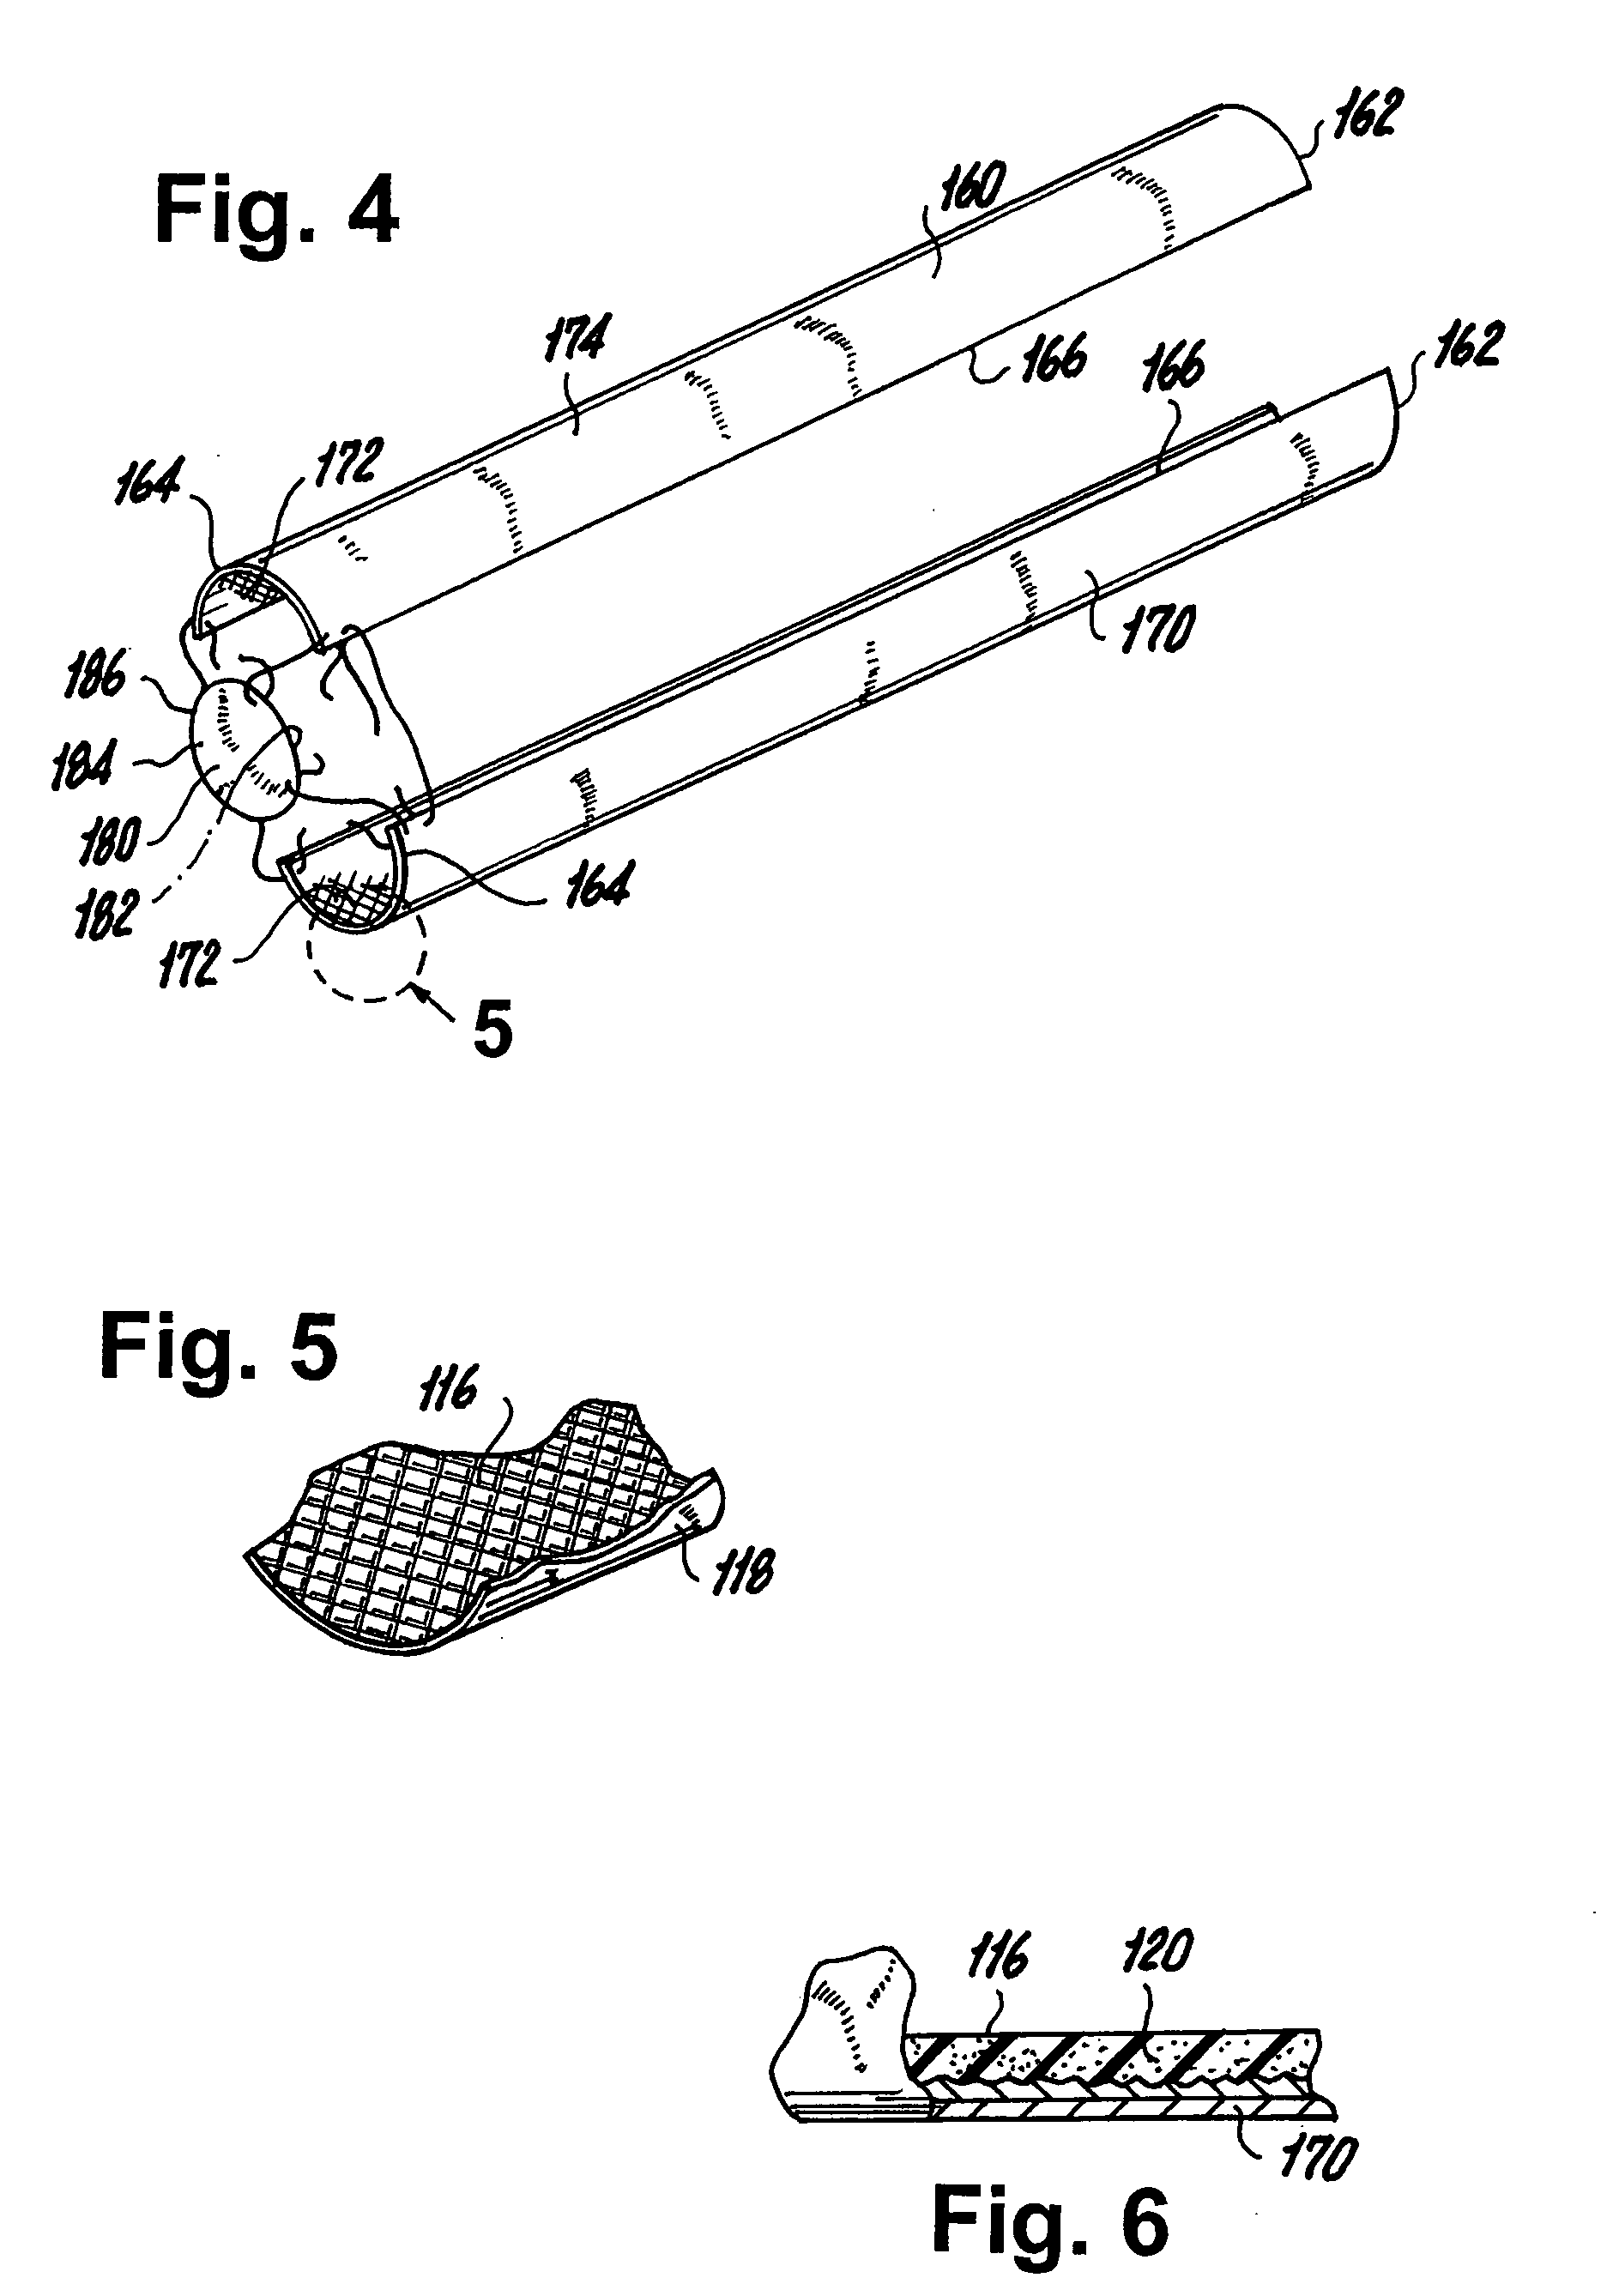 Liner with exterior coating for use with prosthetic devices